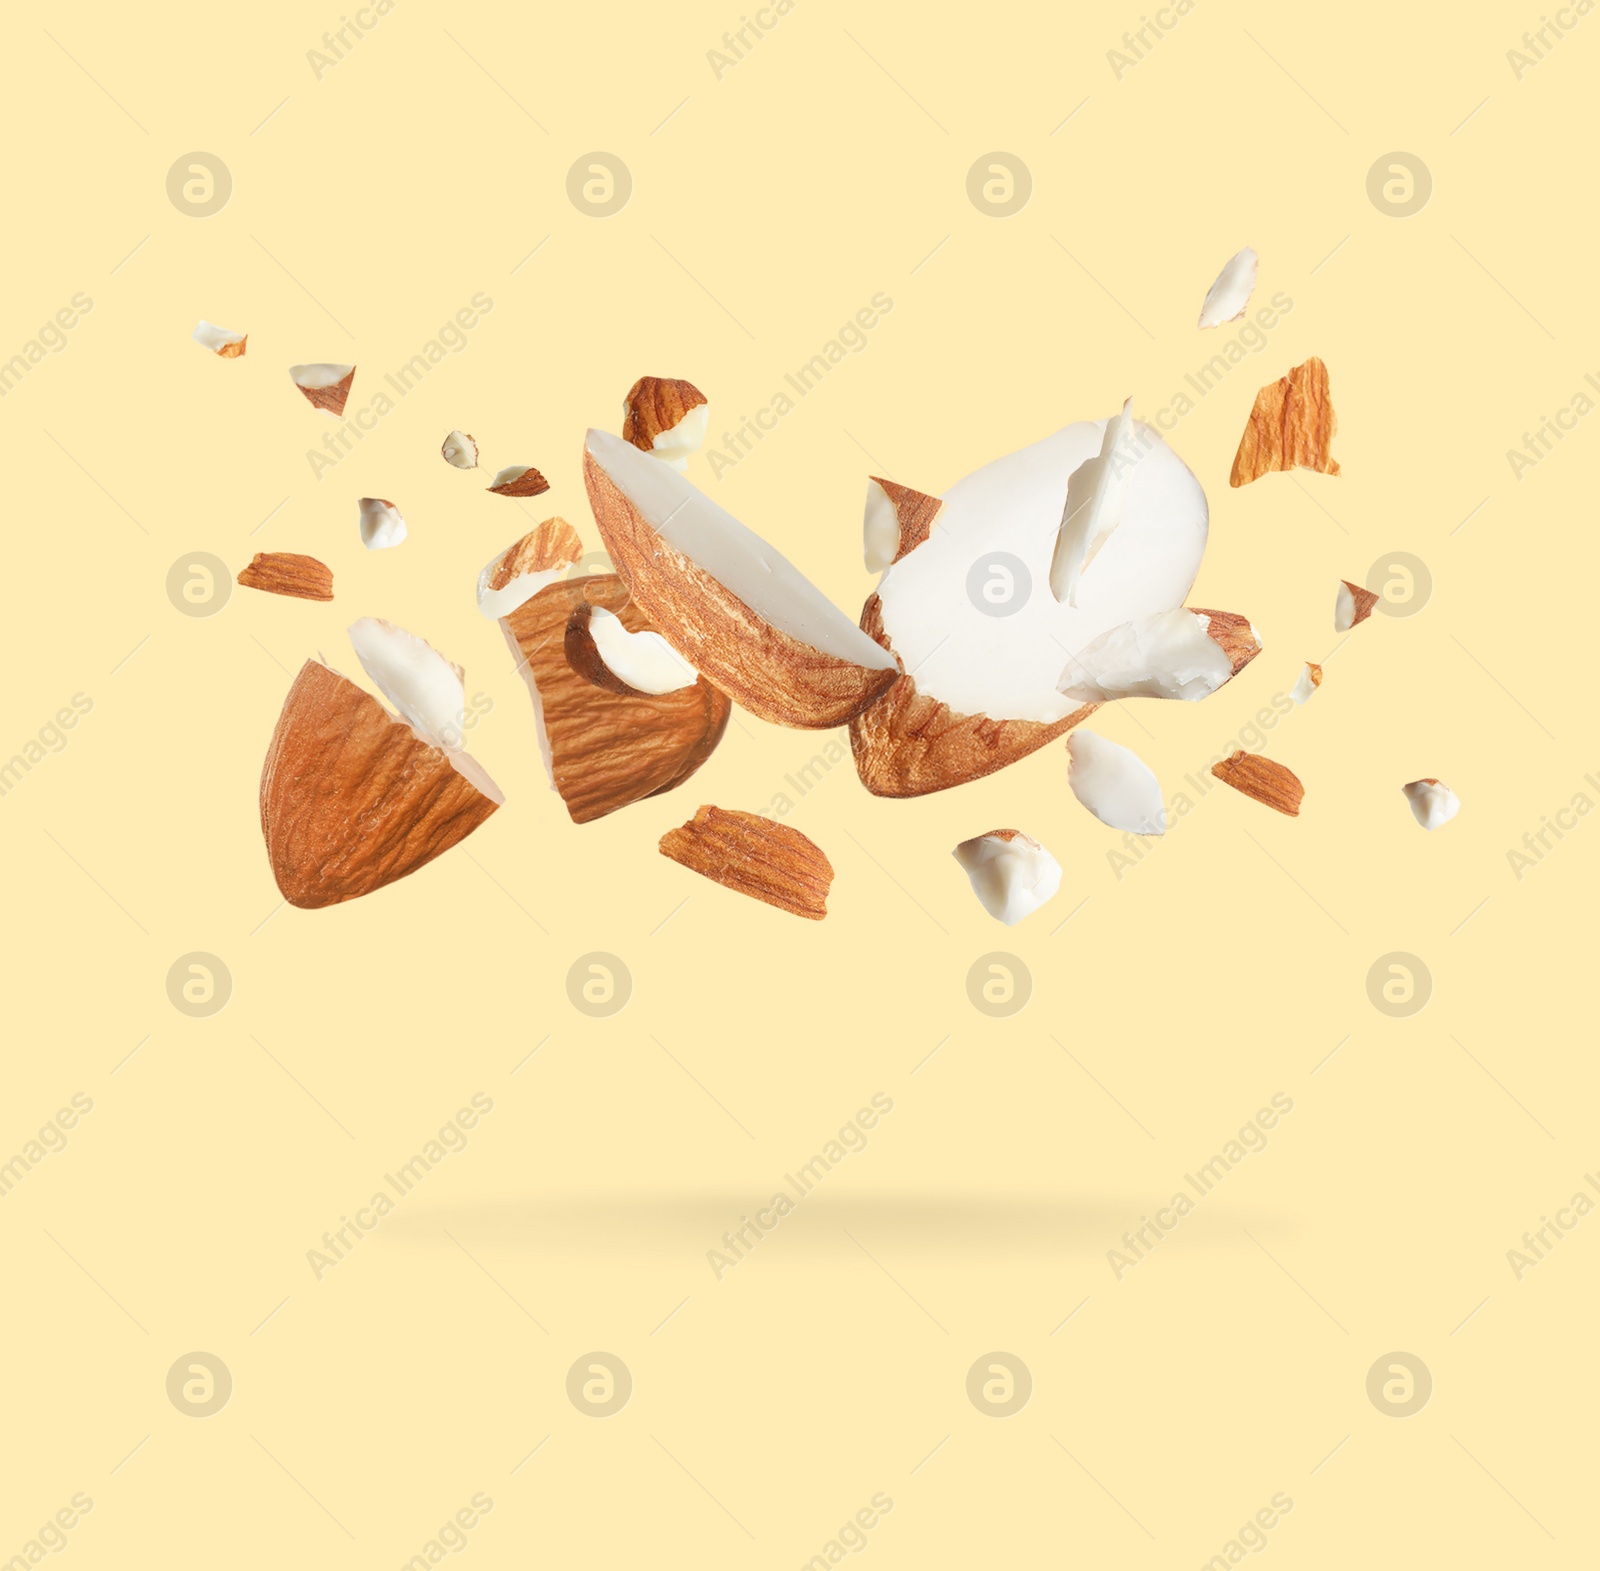 Image of Pieces of tasty almonds falling on beige background